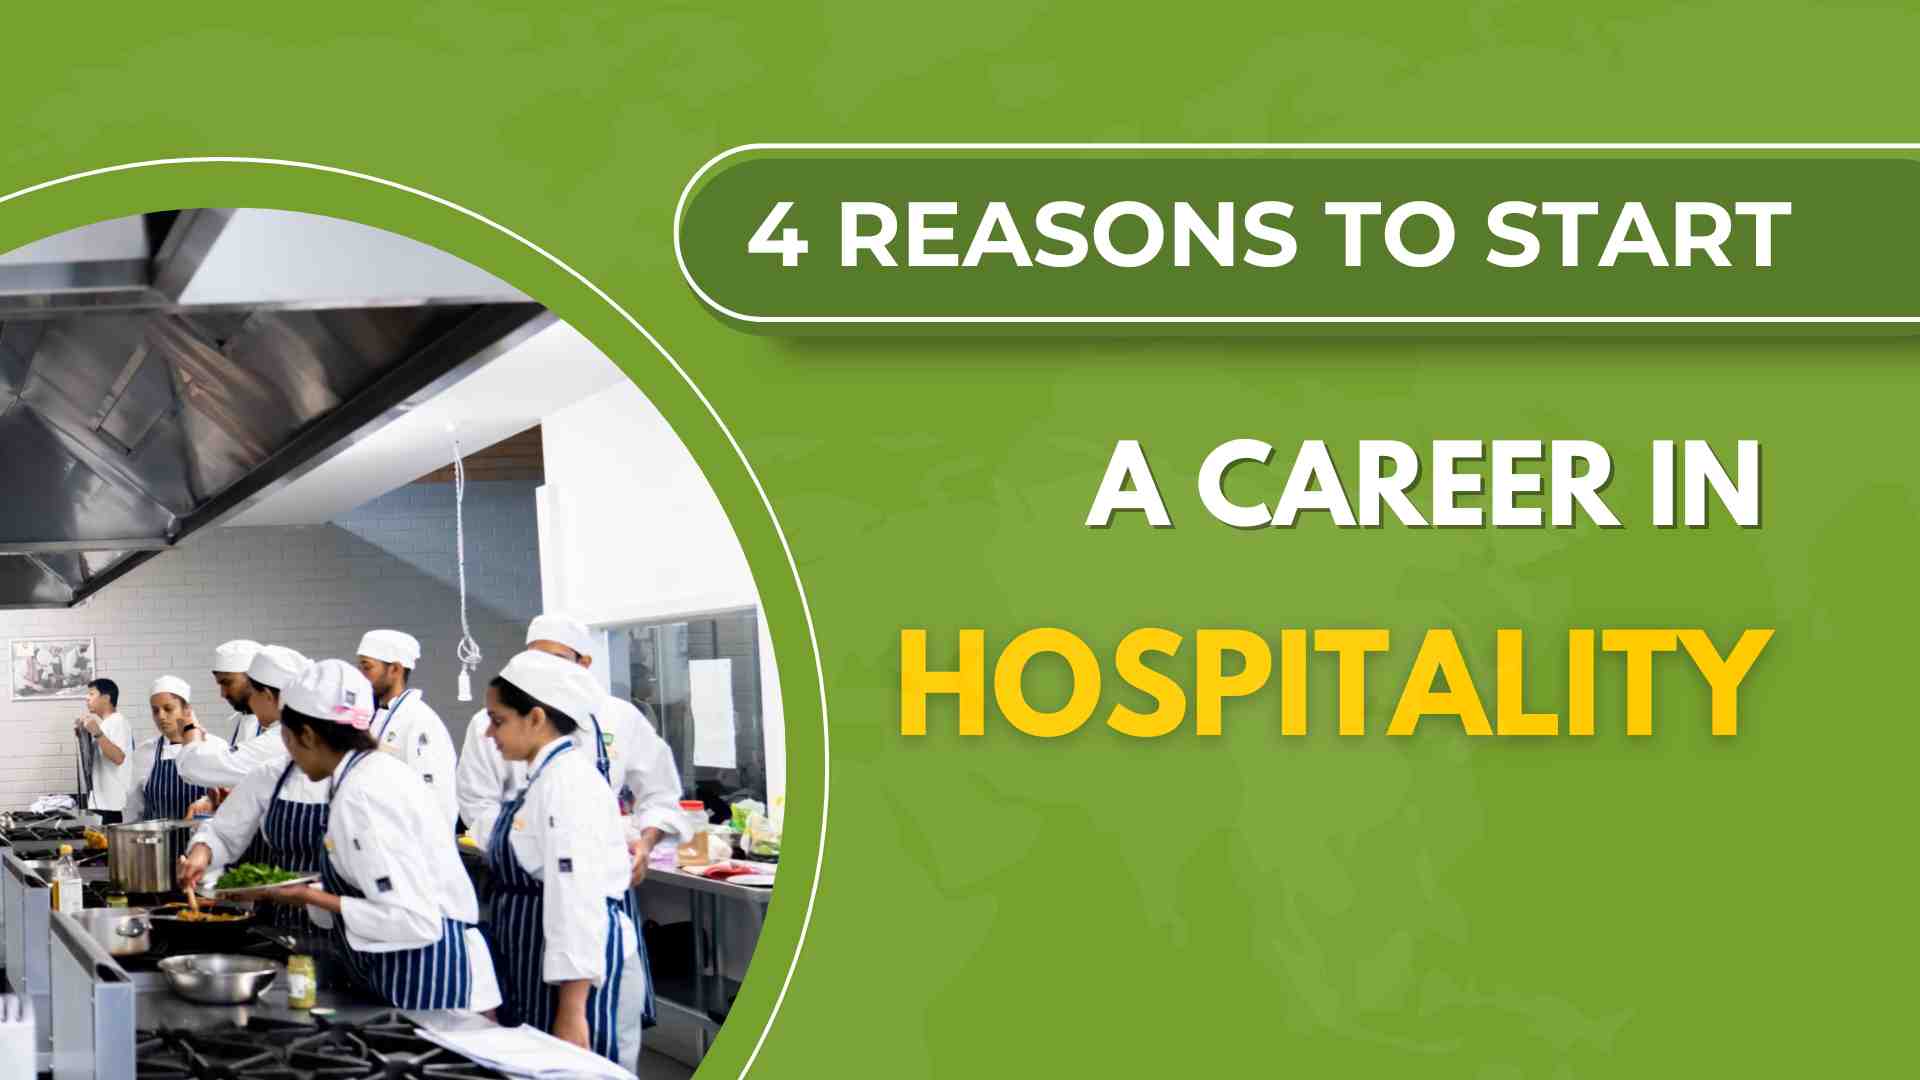 4 Reasons to Start a Career in Hospitality